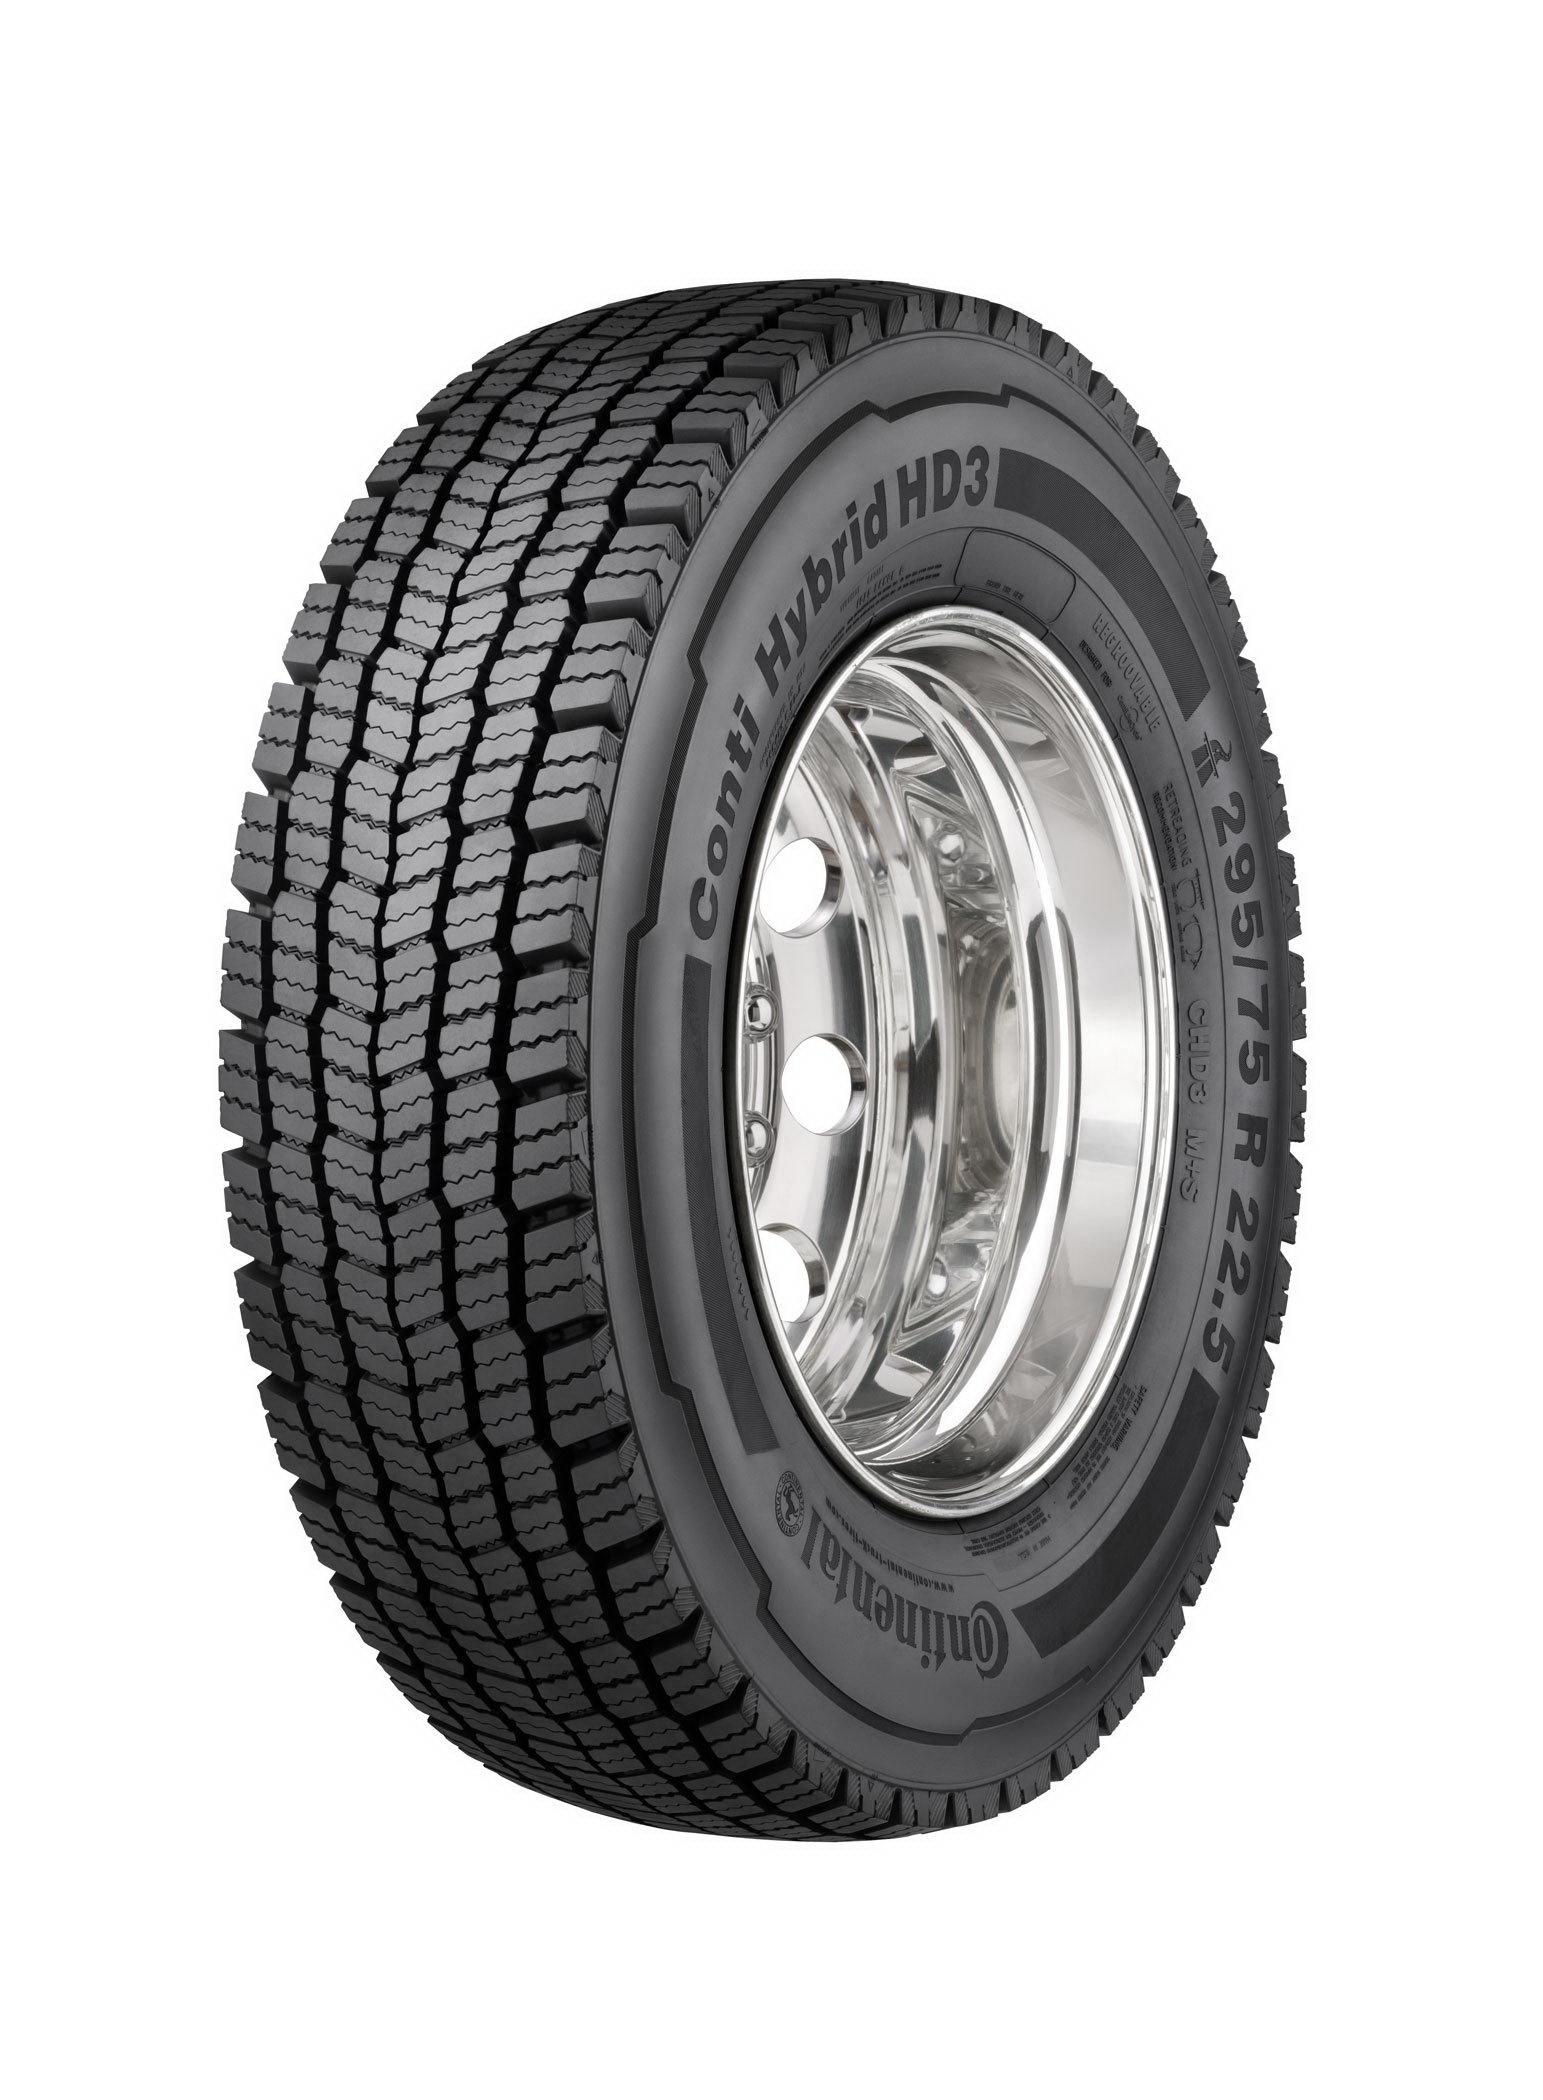 Anvelope tractiune CONTINENTAL CHD3 205/75 R17.5 124/122M